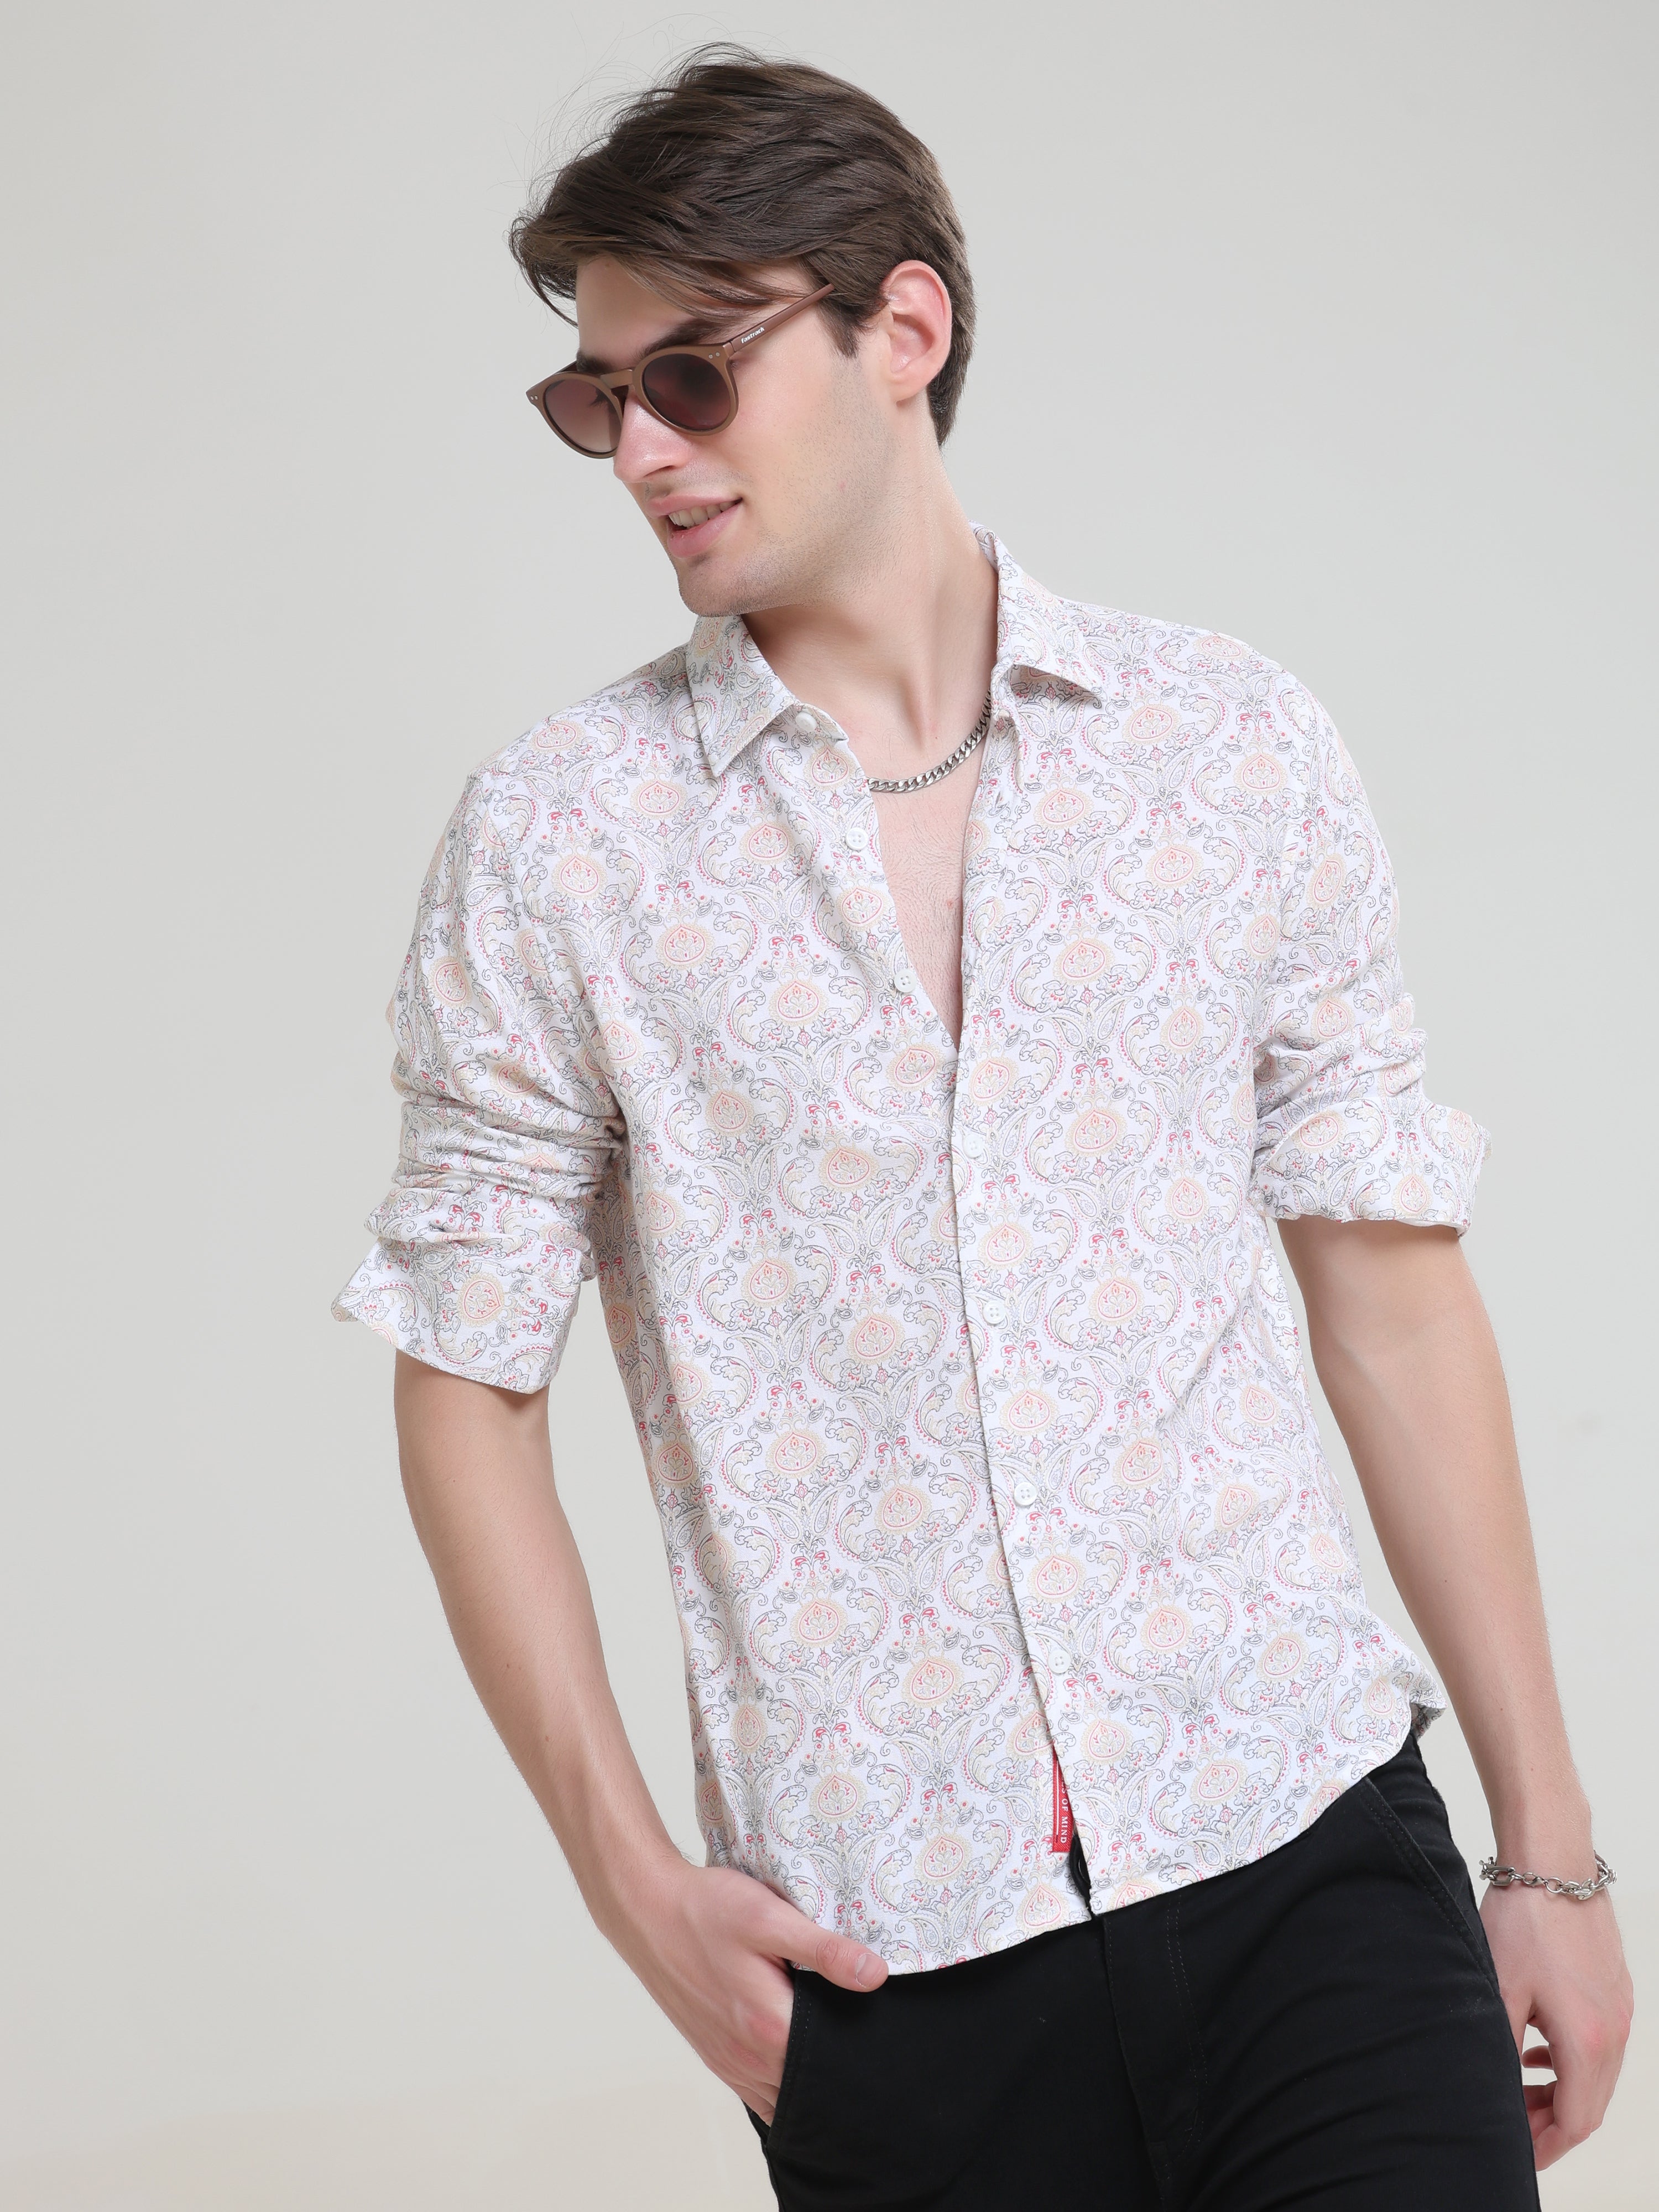 Shop Stylish Rayon Special Printed Shirts OnlineRs. 1299.00